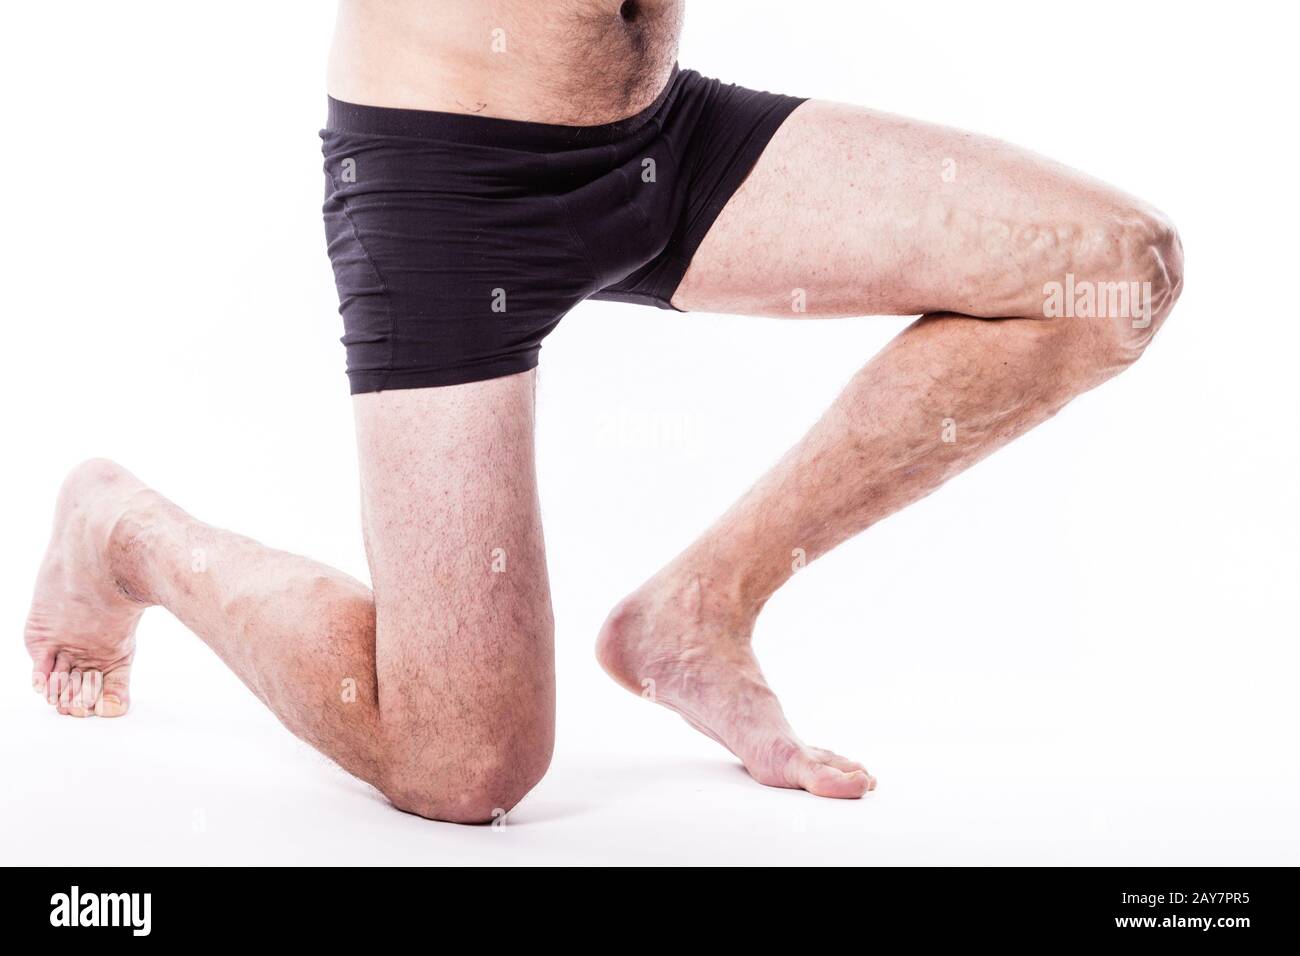 People with varicose veins of the lower extremities and venous t Stock Photo